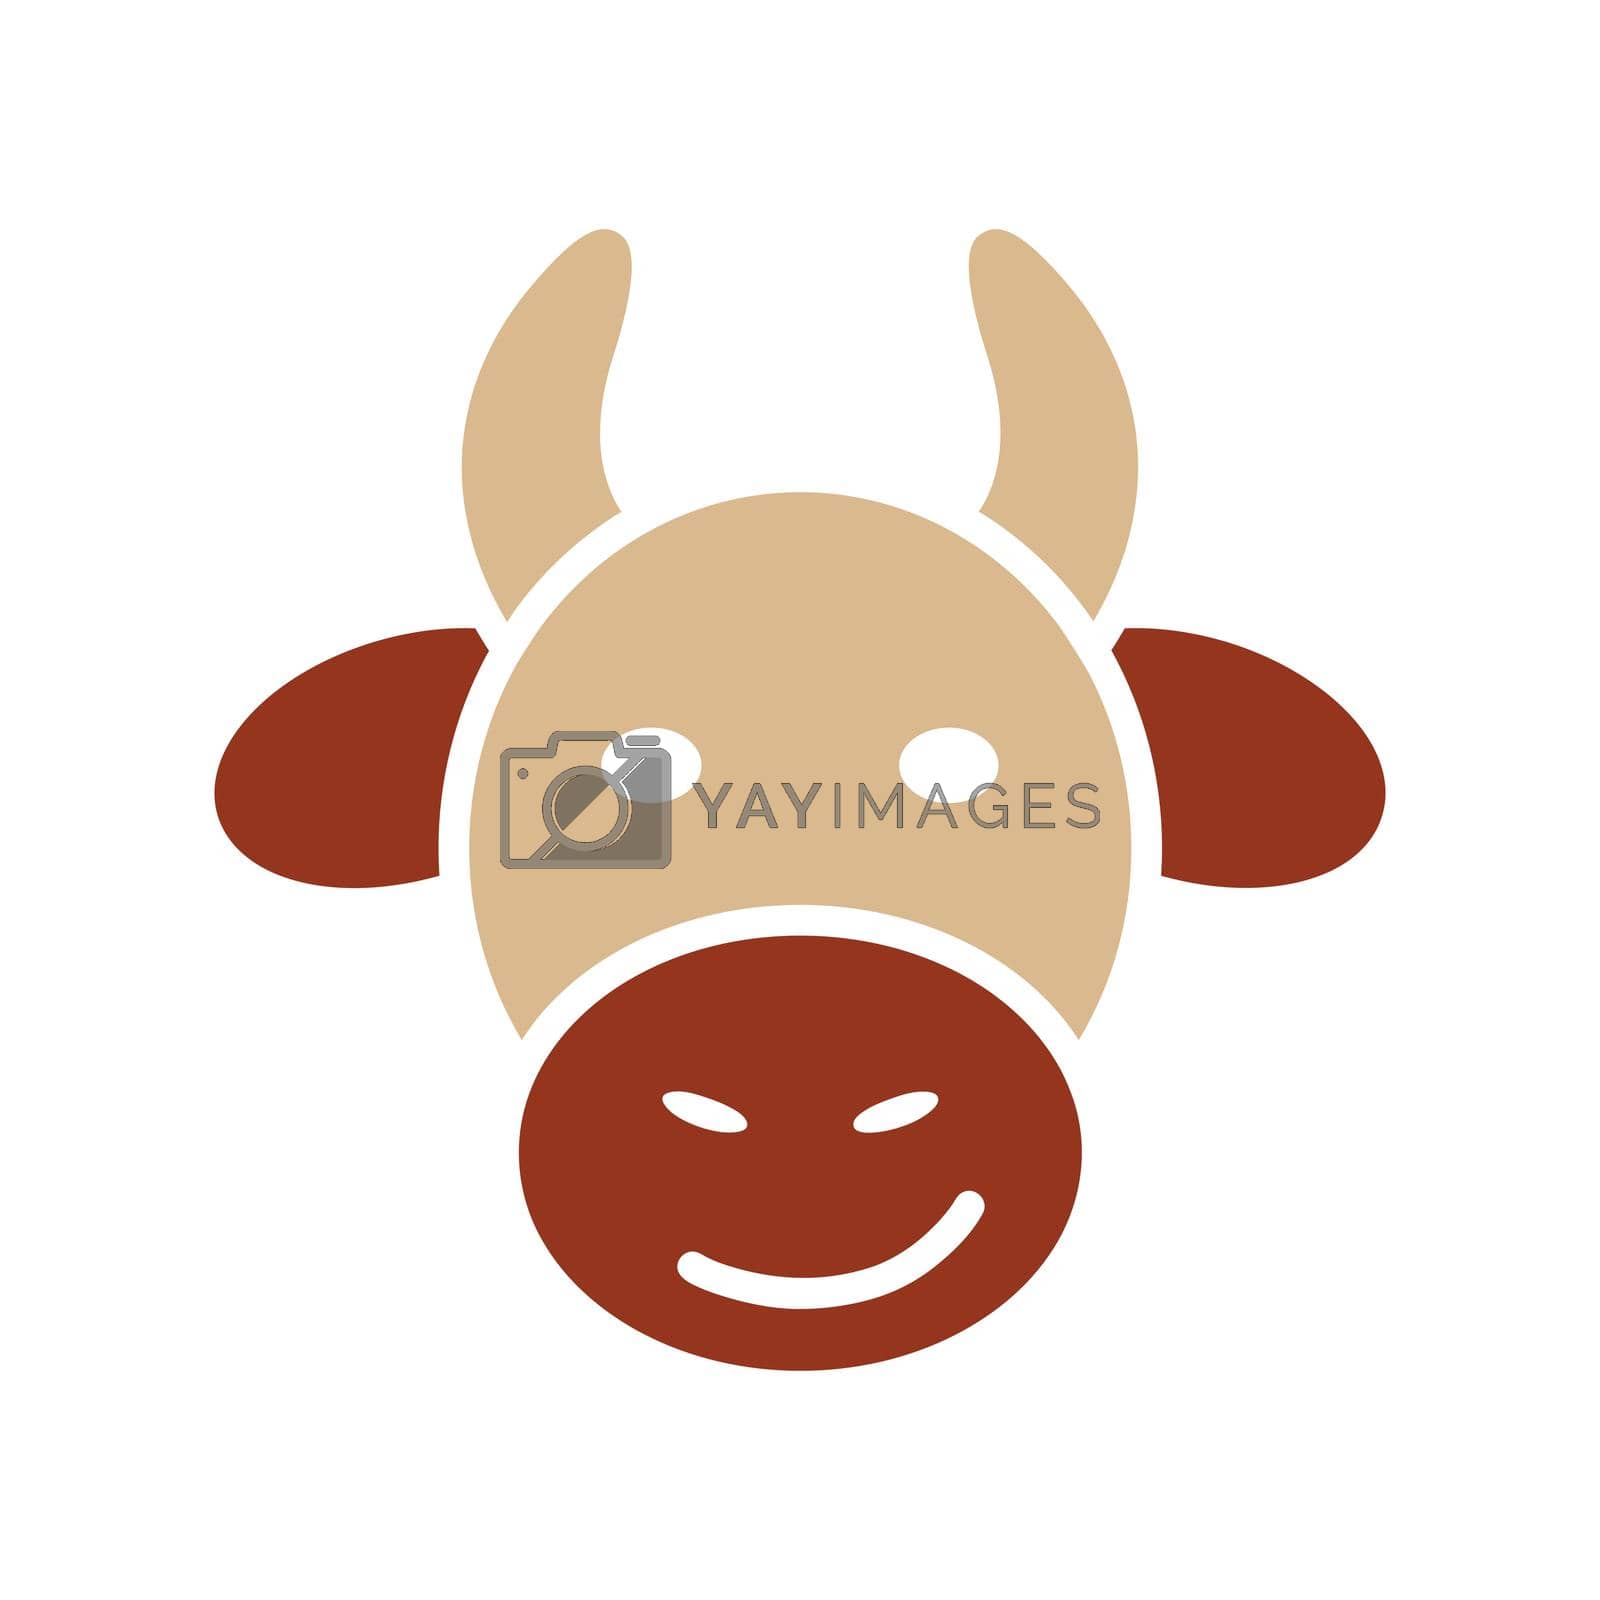 Royalty free image of Cow glyph icon. Farm animal vector illustration by nosik